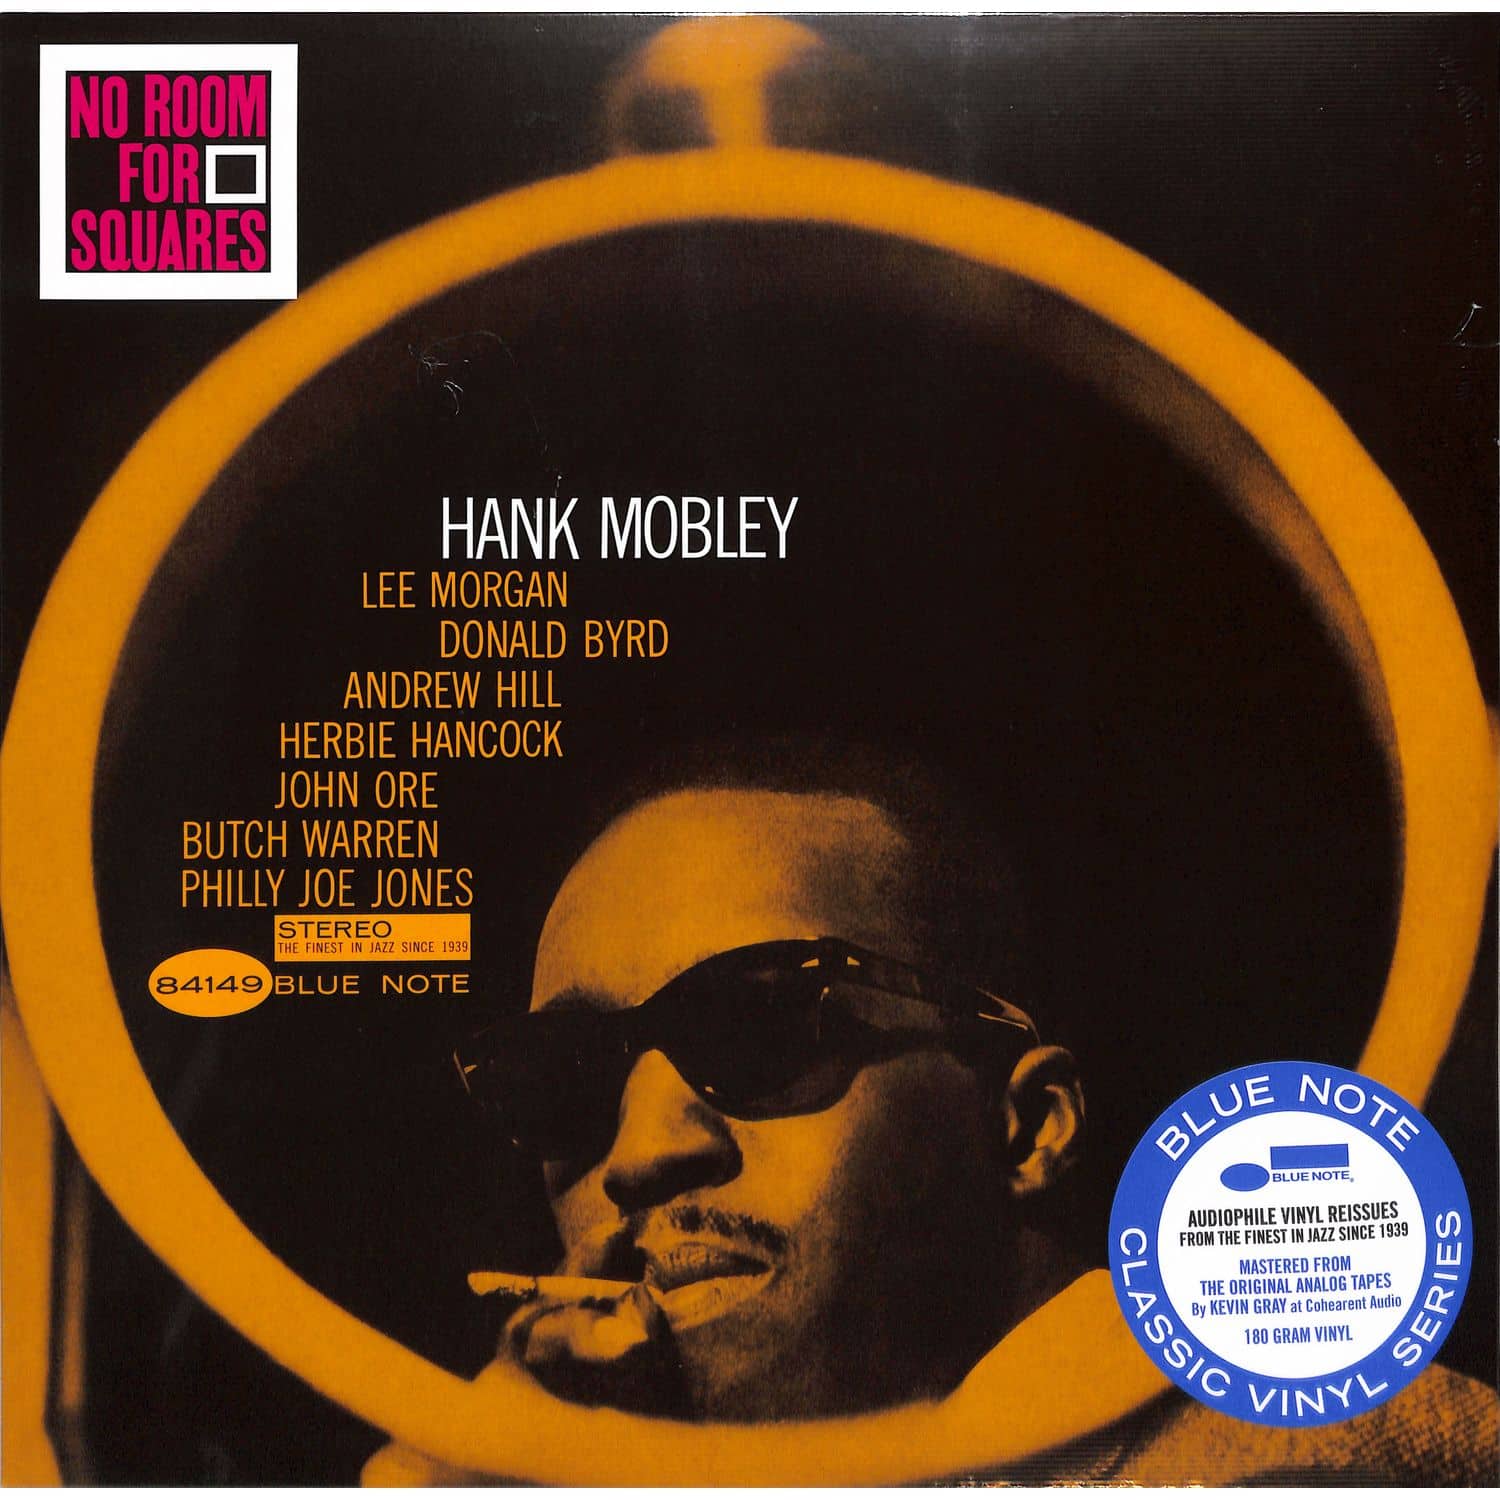 Hank Mobley - NO ROOM FOR SQUARES 